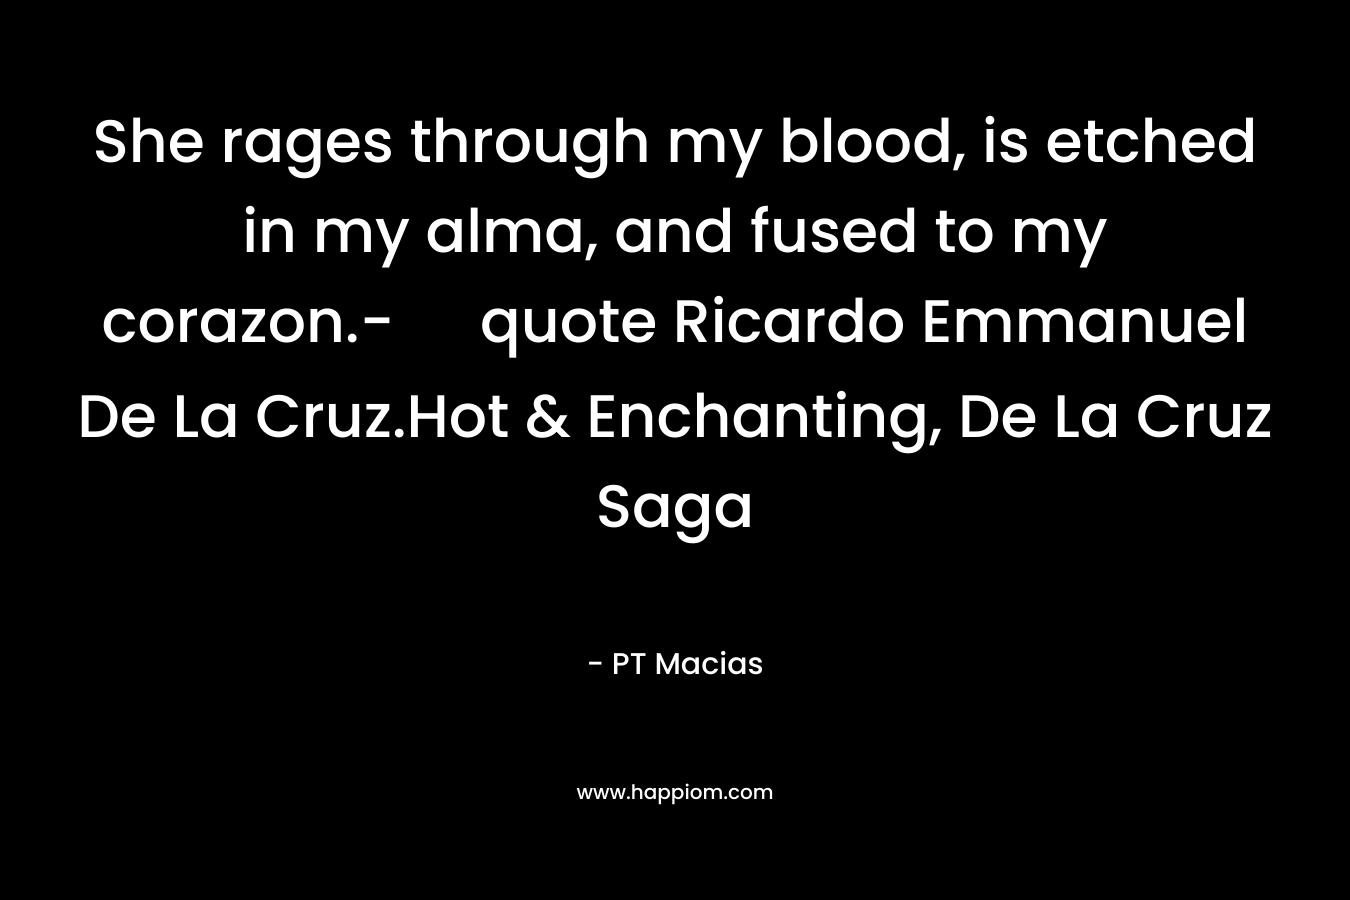 She rages through my blood, is etched in my alma, and fused to my corazon.- quote Ricardo Emmanuel De La Cruz.Hot & Enchanting, De La Cruz Saga